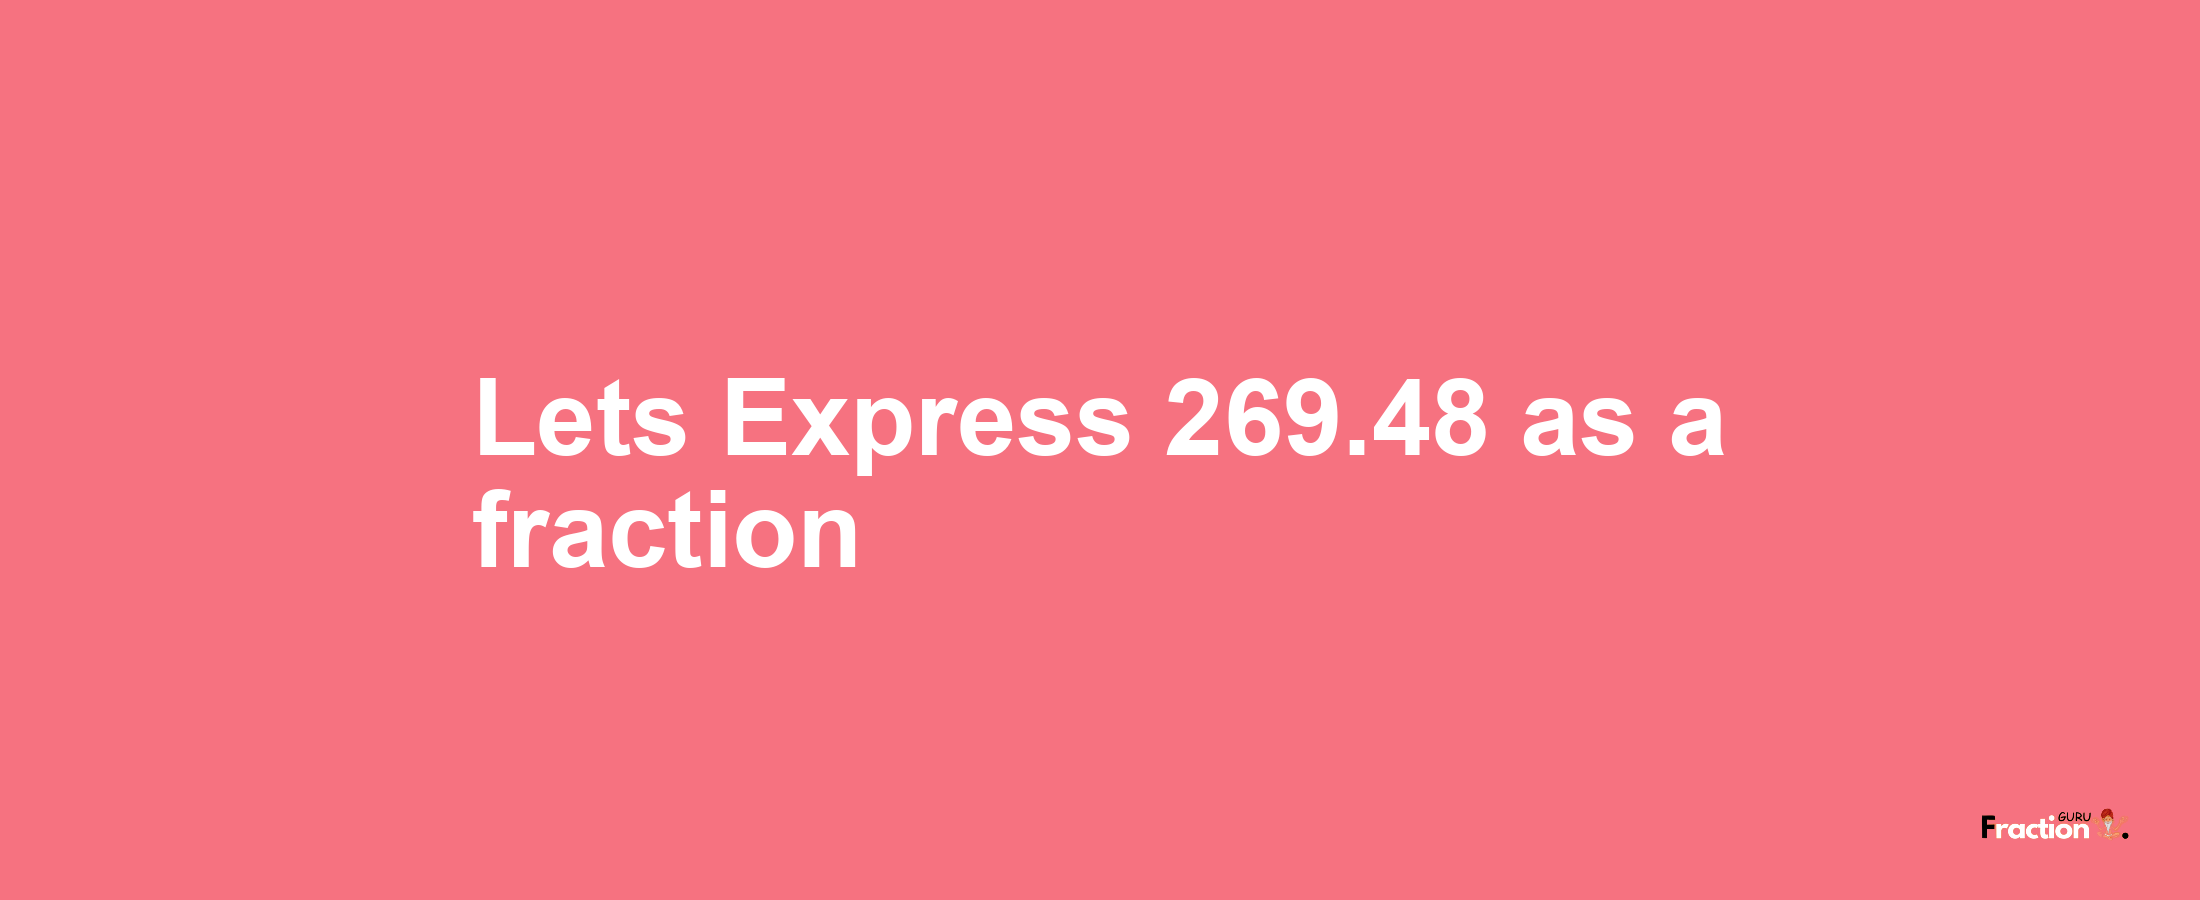 Lets Express 269.48 as afraction